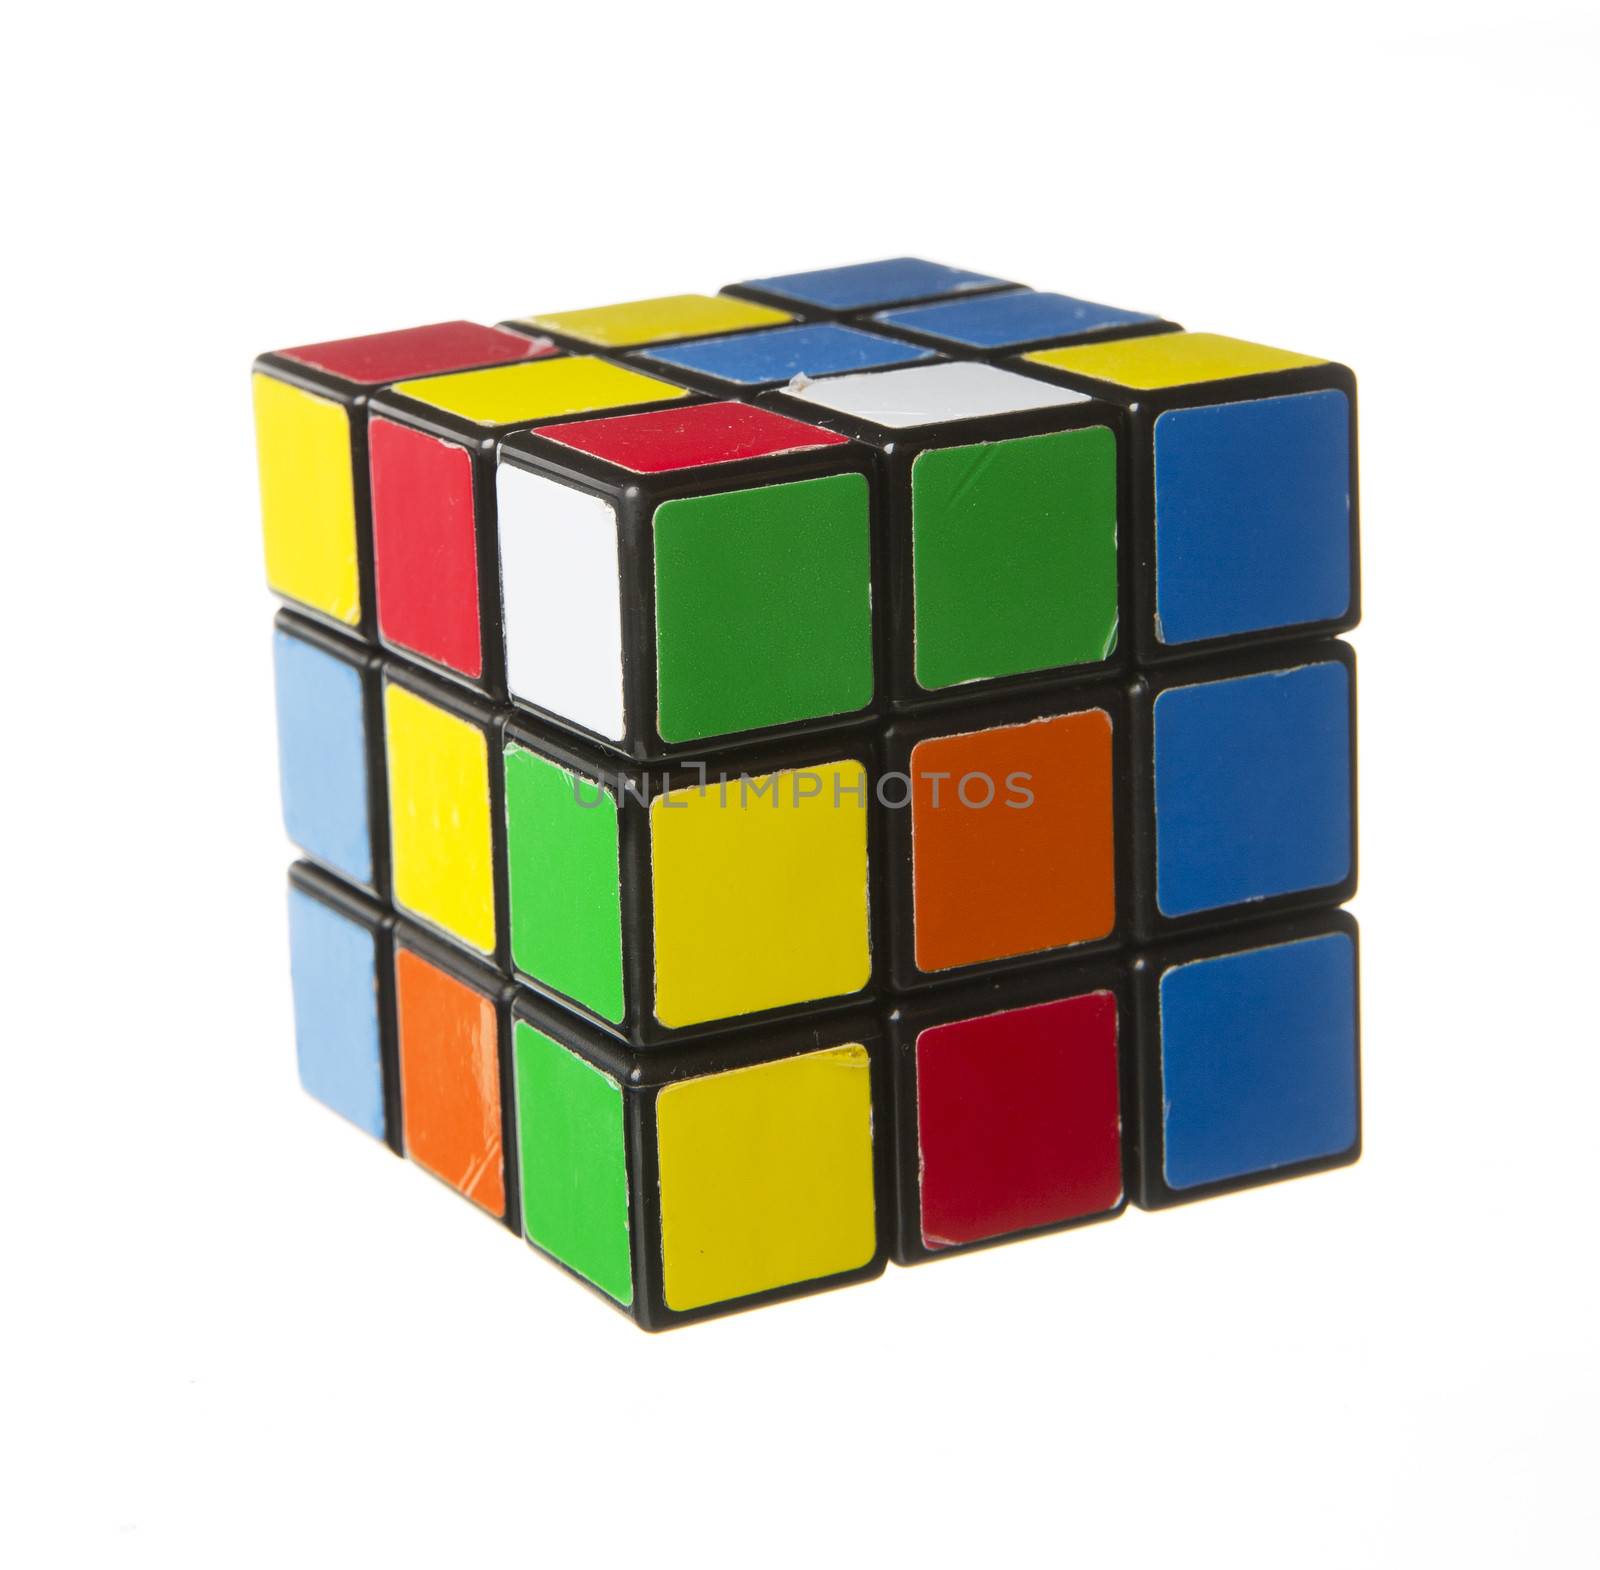 Colored Cube by gemenacom